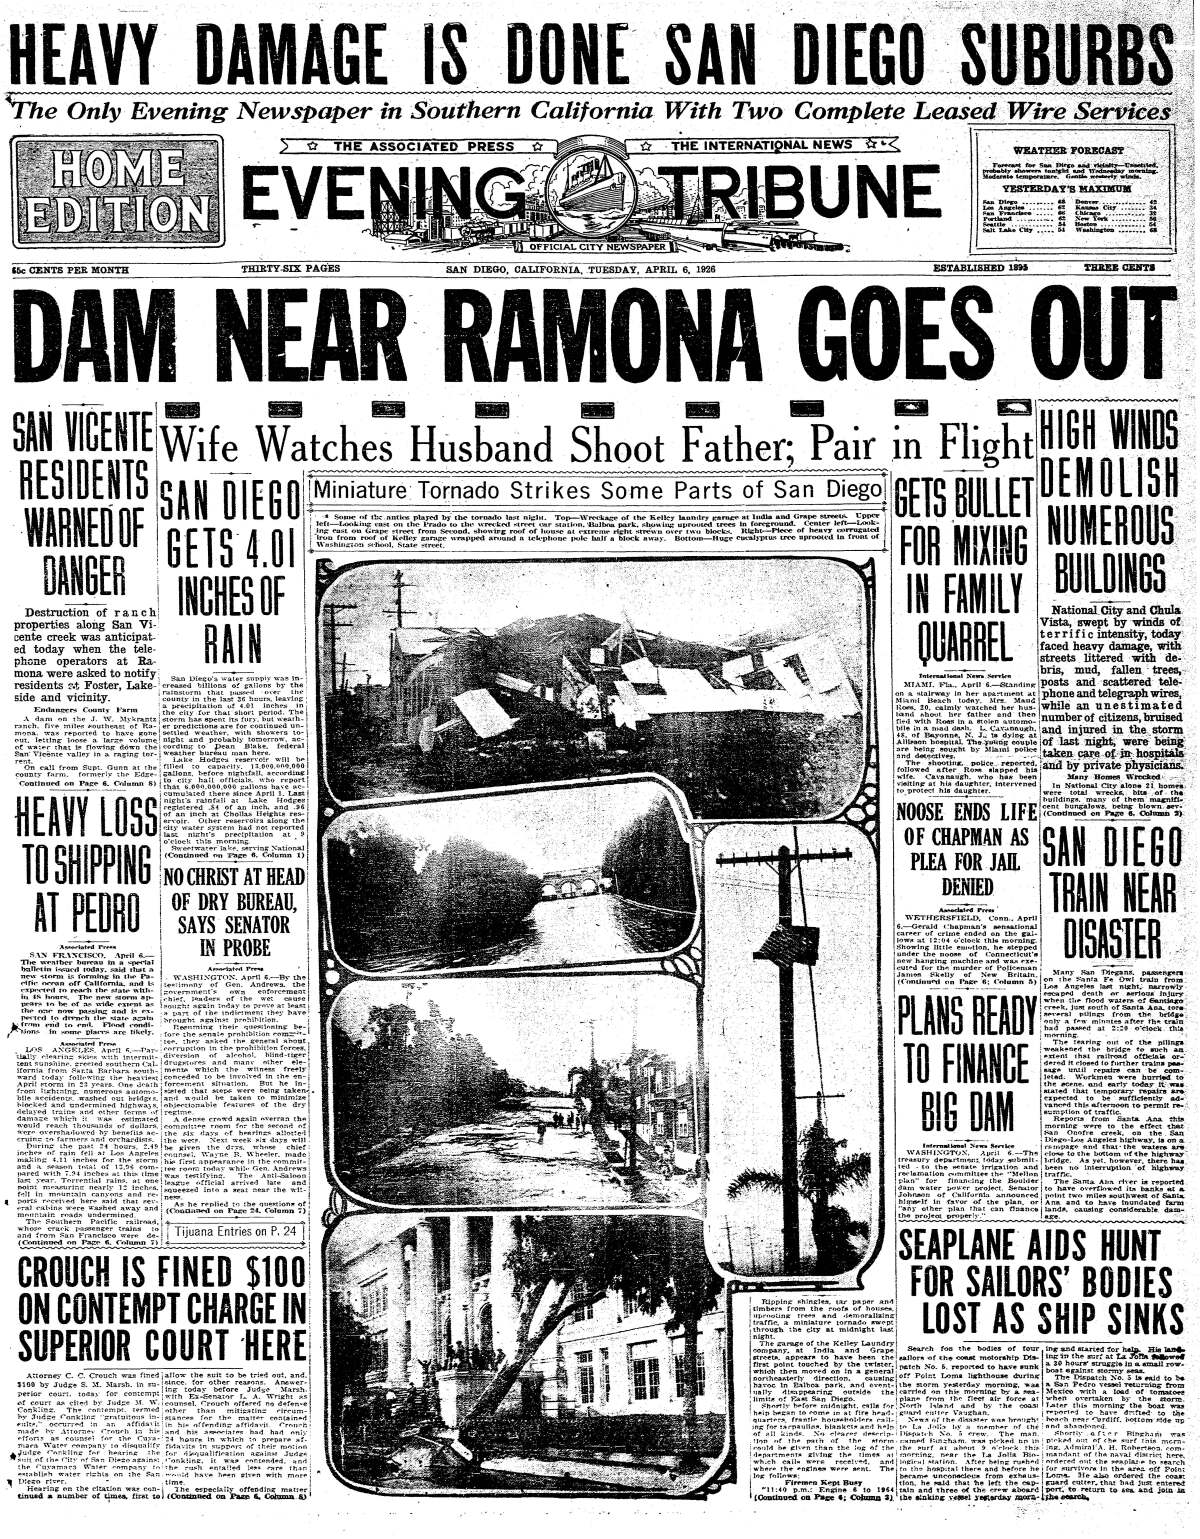 Tornadoes reported on the front page of the Evening Tribune on April 6, 1926.